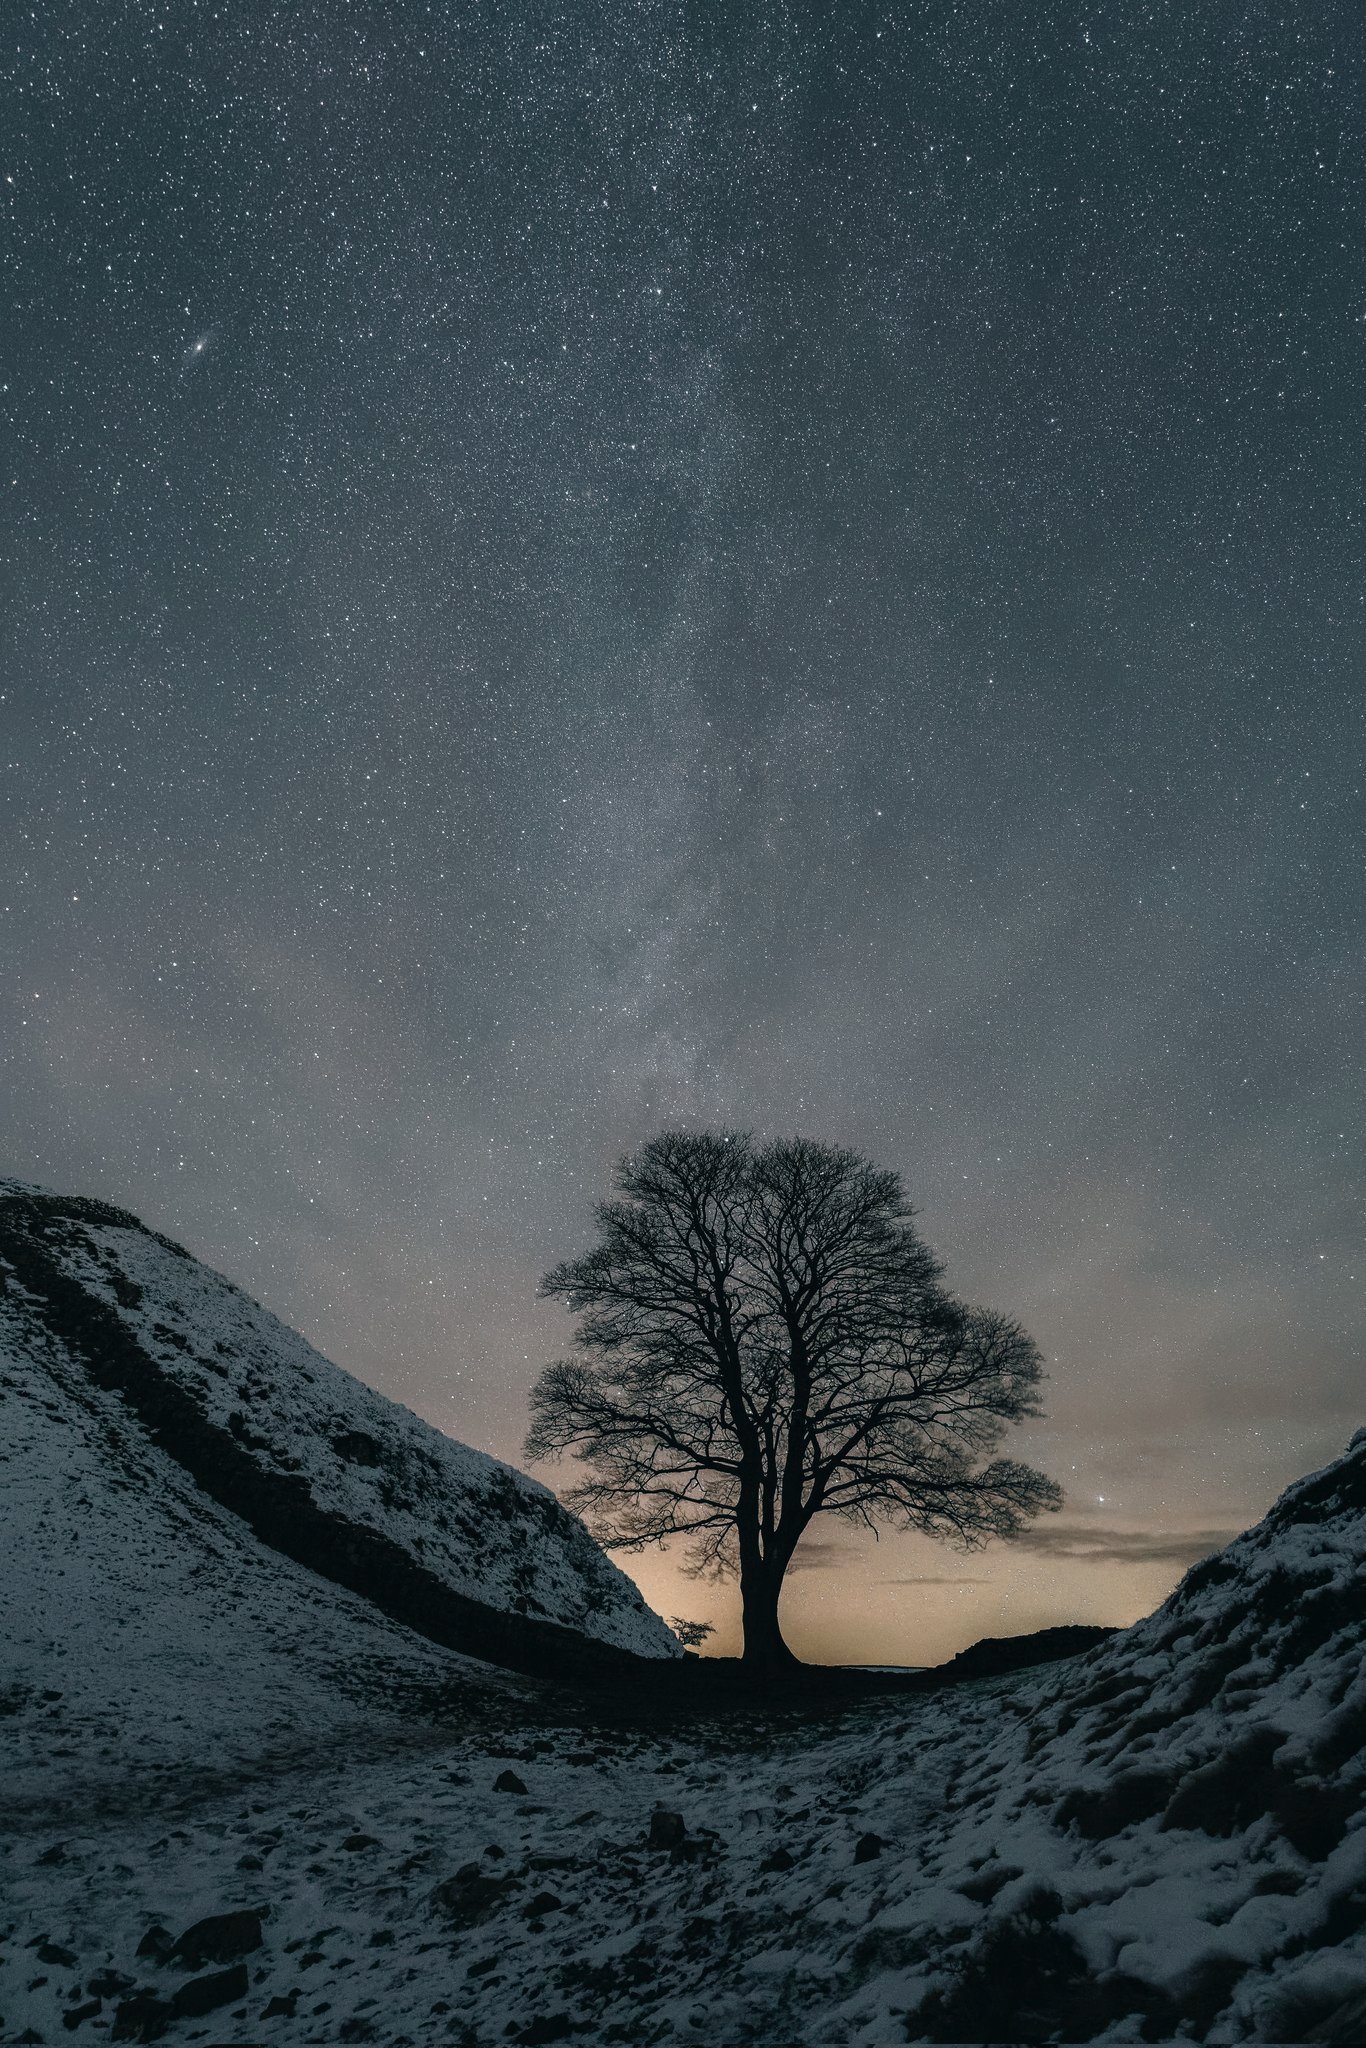 The Sycamore Gap tree without leaves with snow lying on the ground and stars in the sky